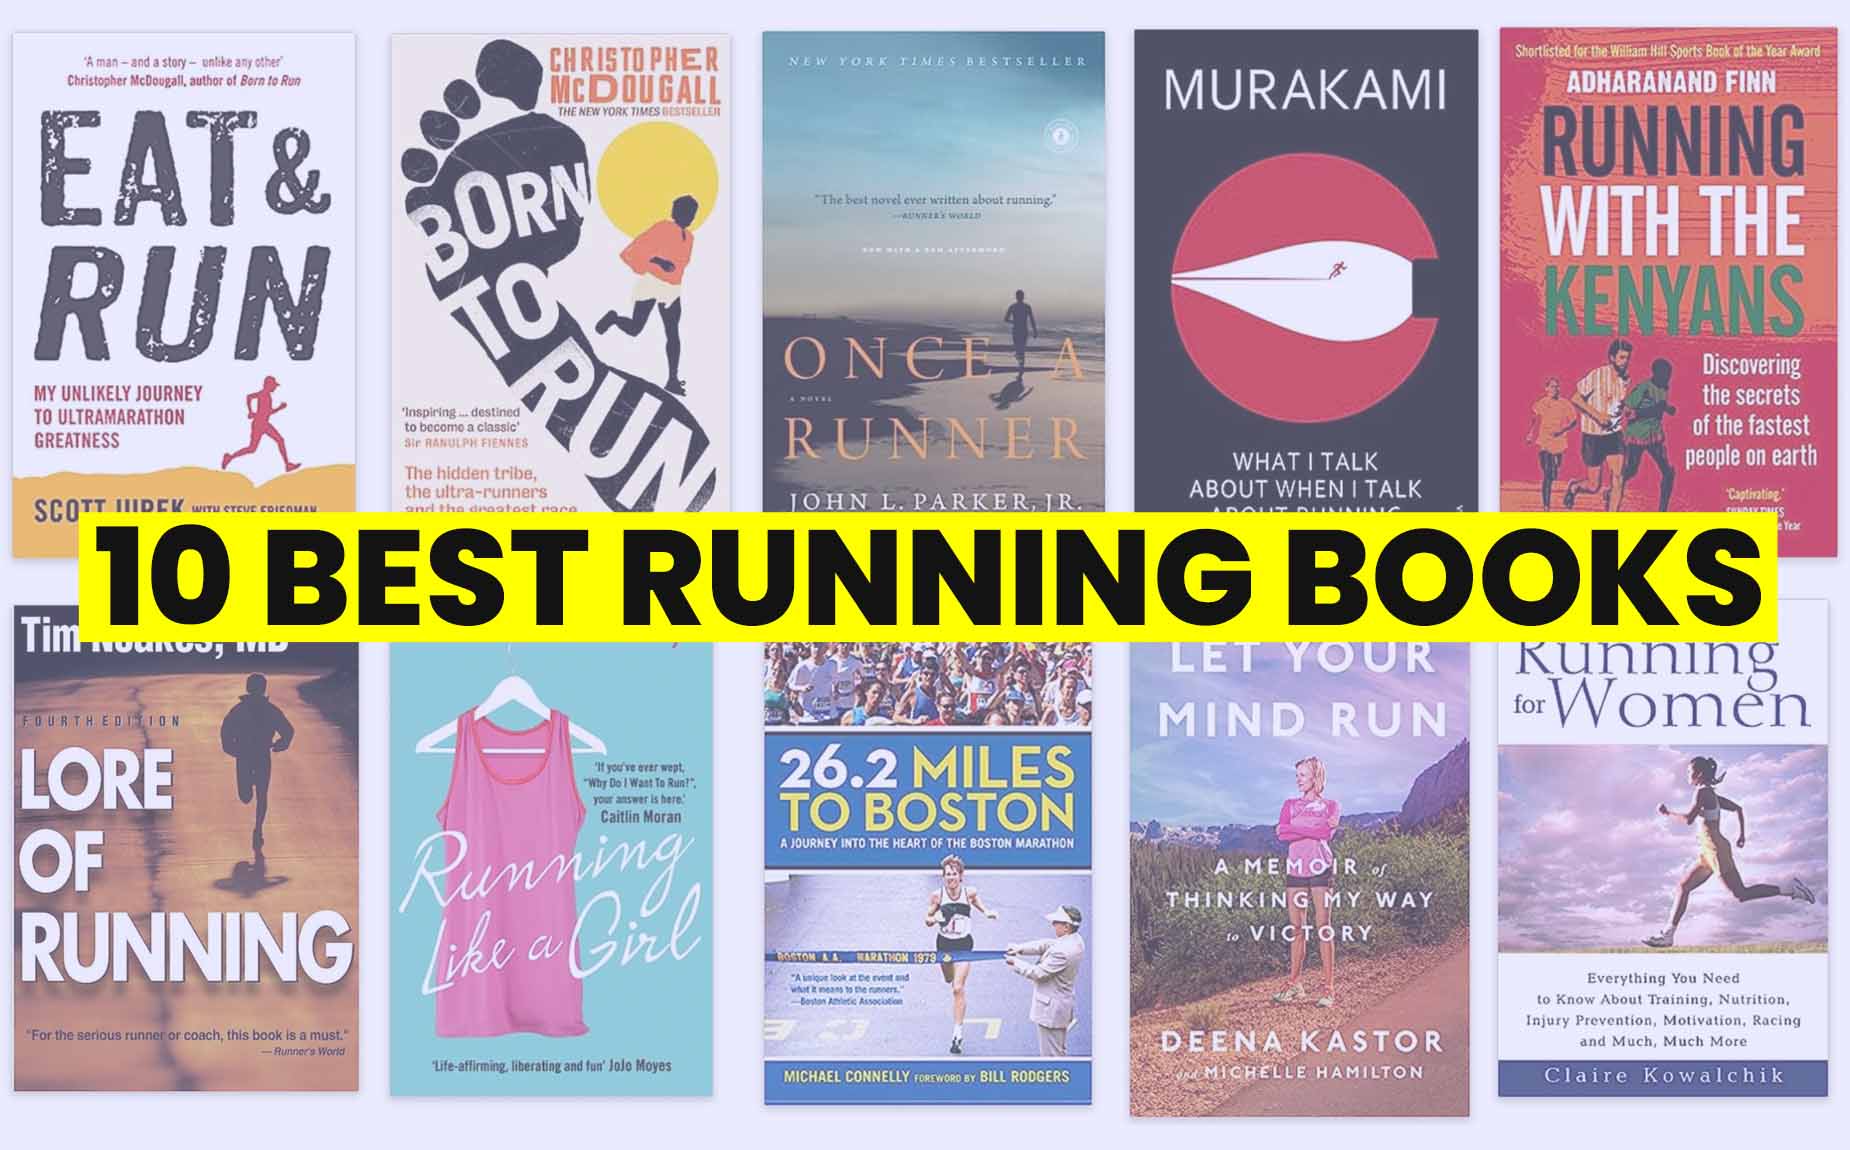 The 10 best running books as chosen by running experts and the running community at jogger.co.uk